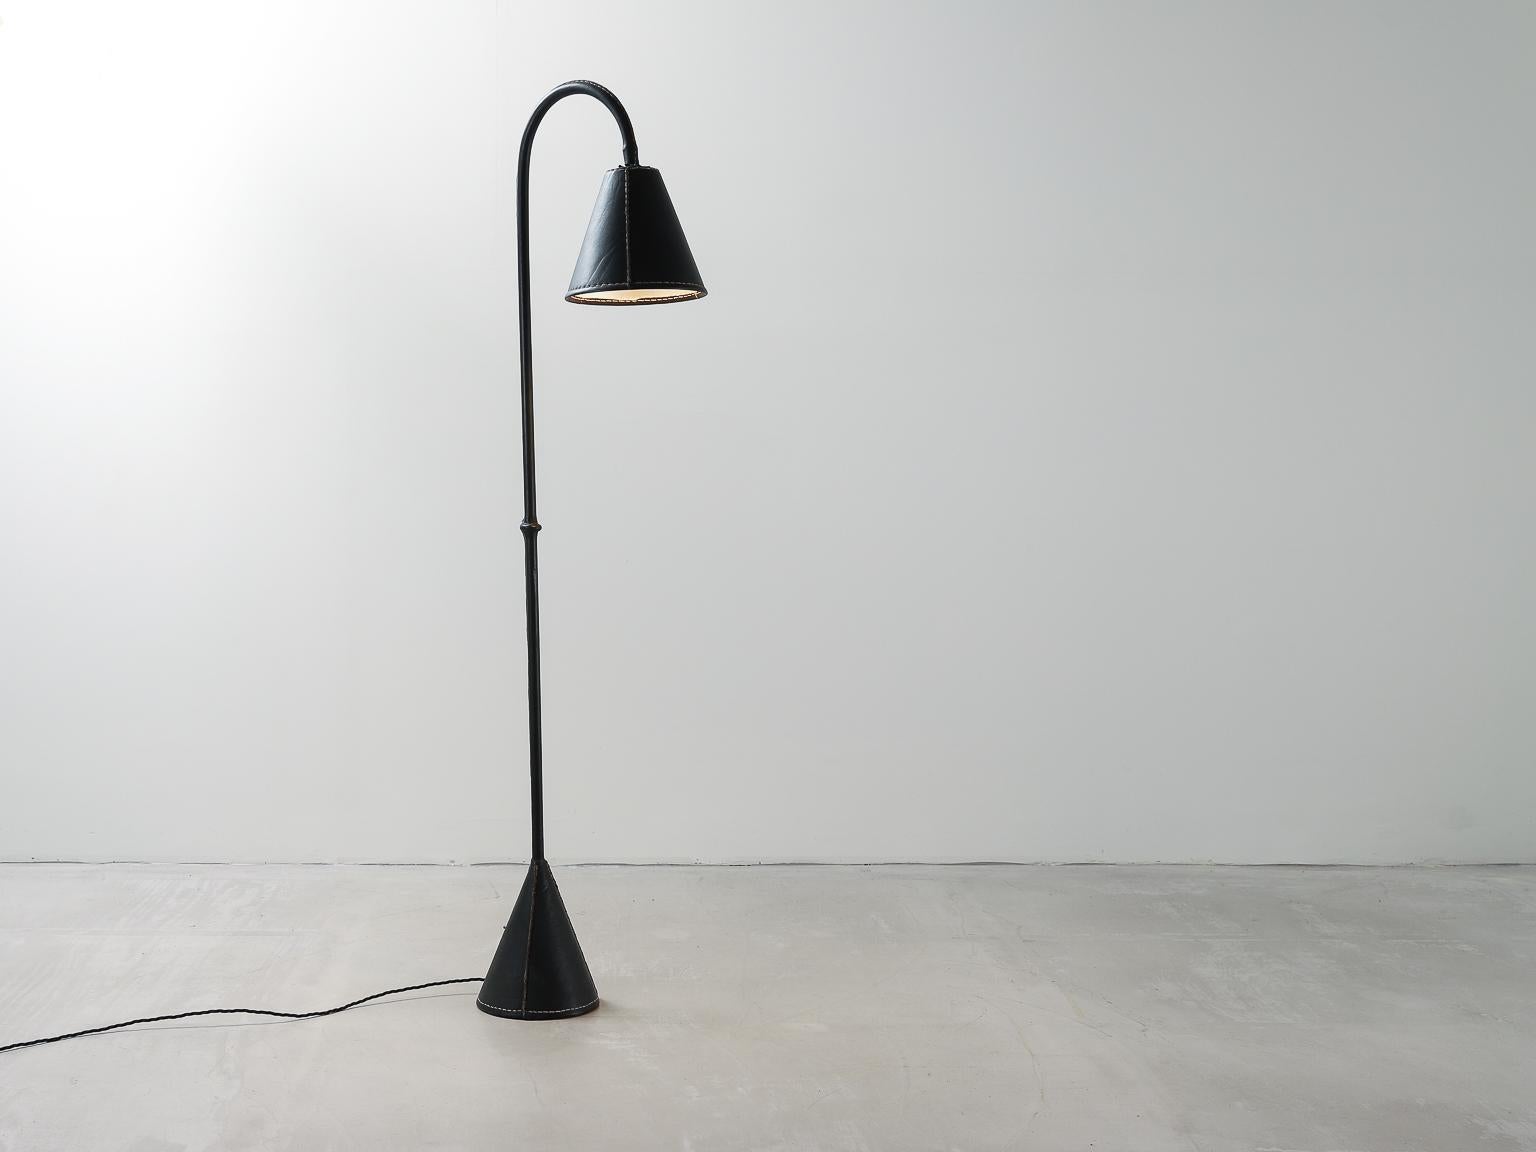 20th Century Classic Valenti Black Leather Floor Lamp Spanish 1960s with Stitching Detail